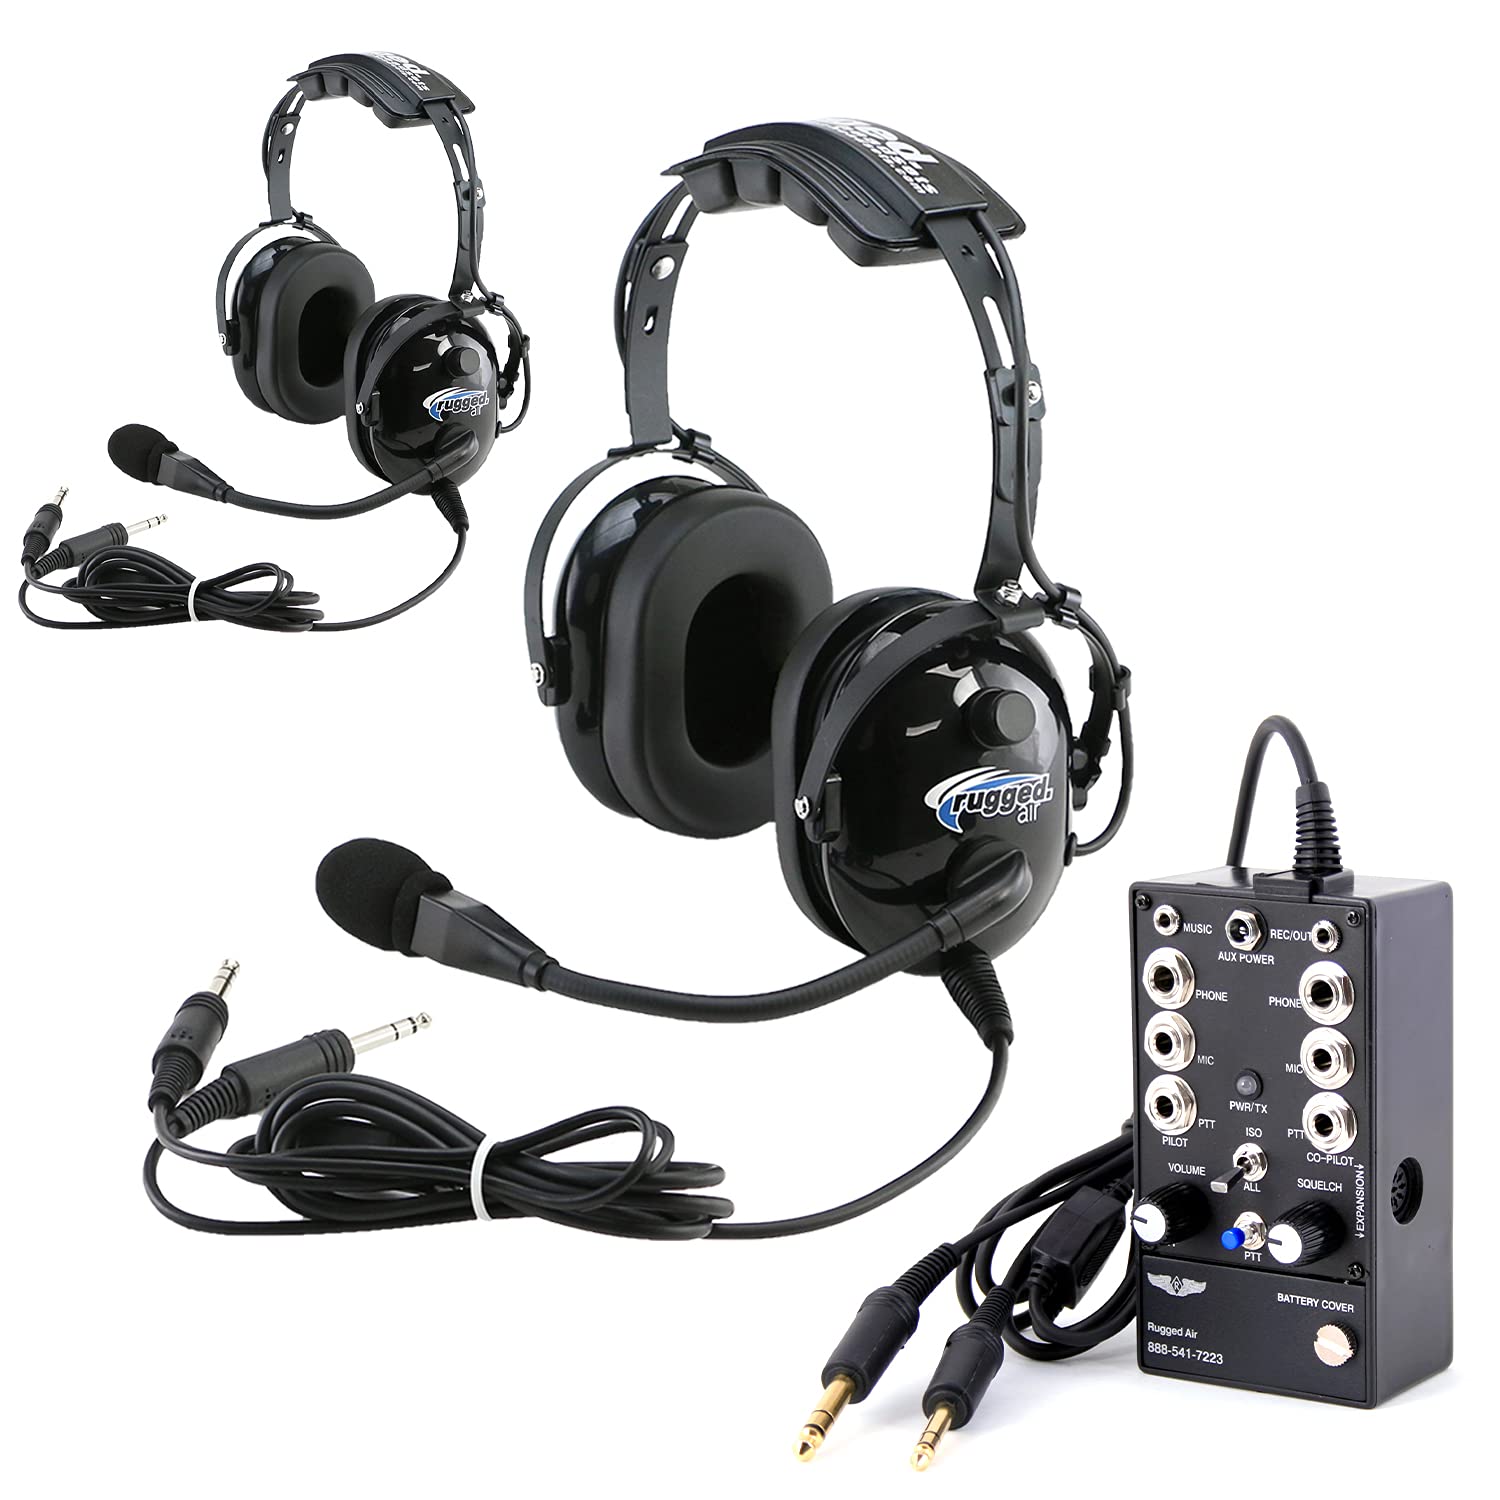 Rugged General Aviation Student Pilot Headsets for Flying Airplanes - Features Noise Reduction GA Dual Plugs Adjustable Headband and Free Headset Bag (Headset) (2 Pack with Intercom)